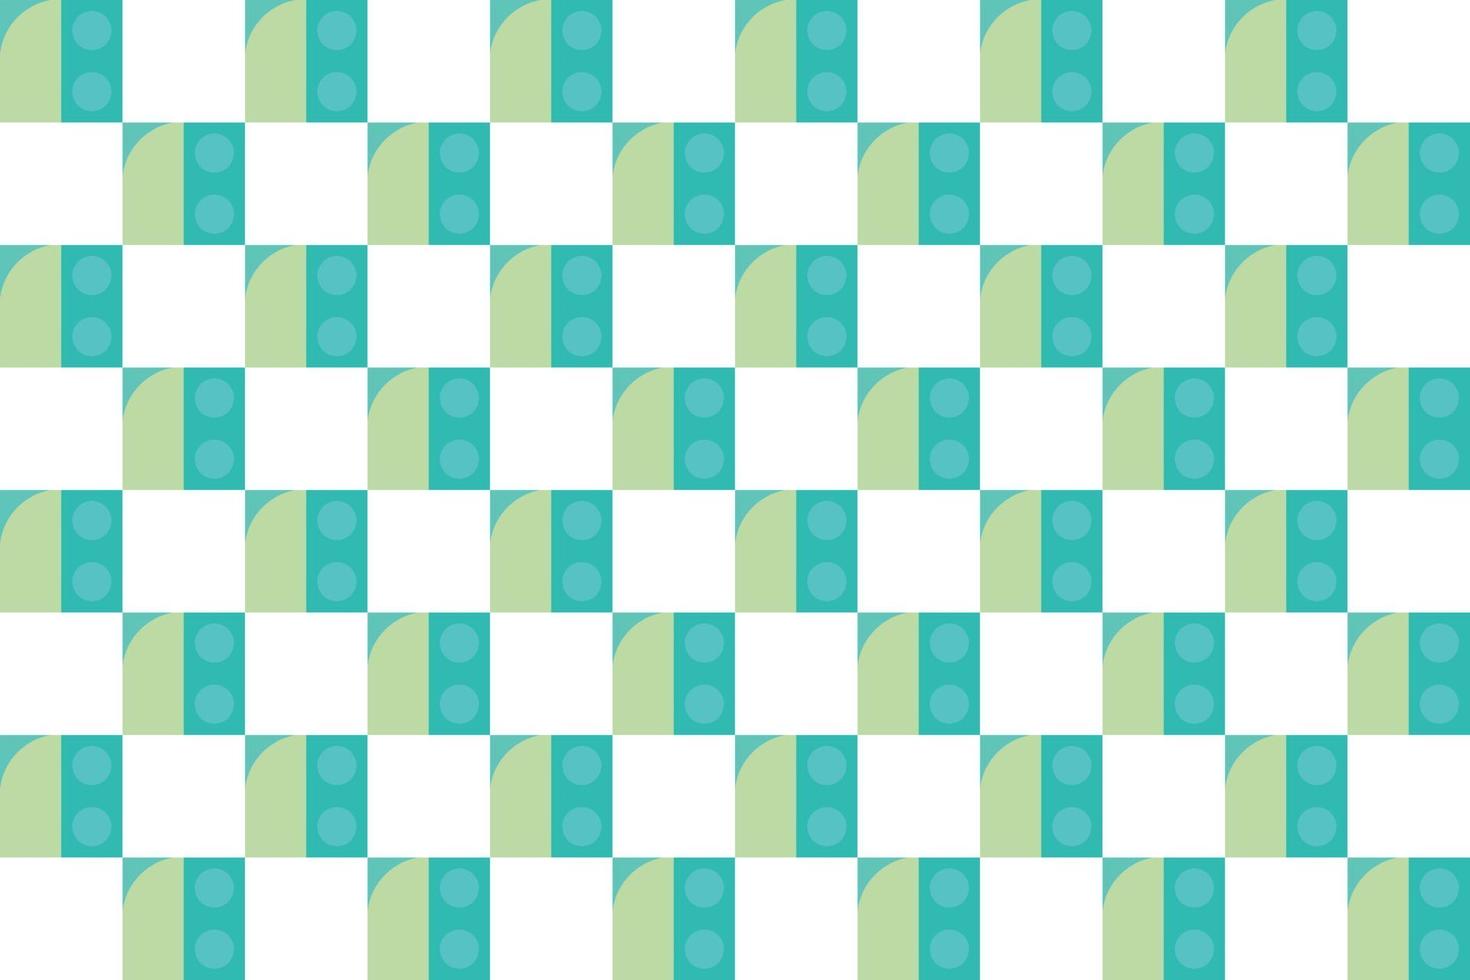 The Checkerboard Pattern The pattern typically contains Multi Colors where a single checker vector